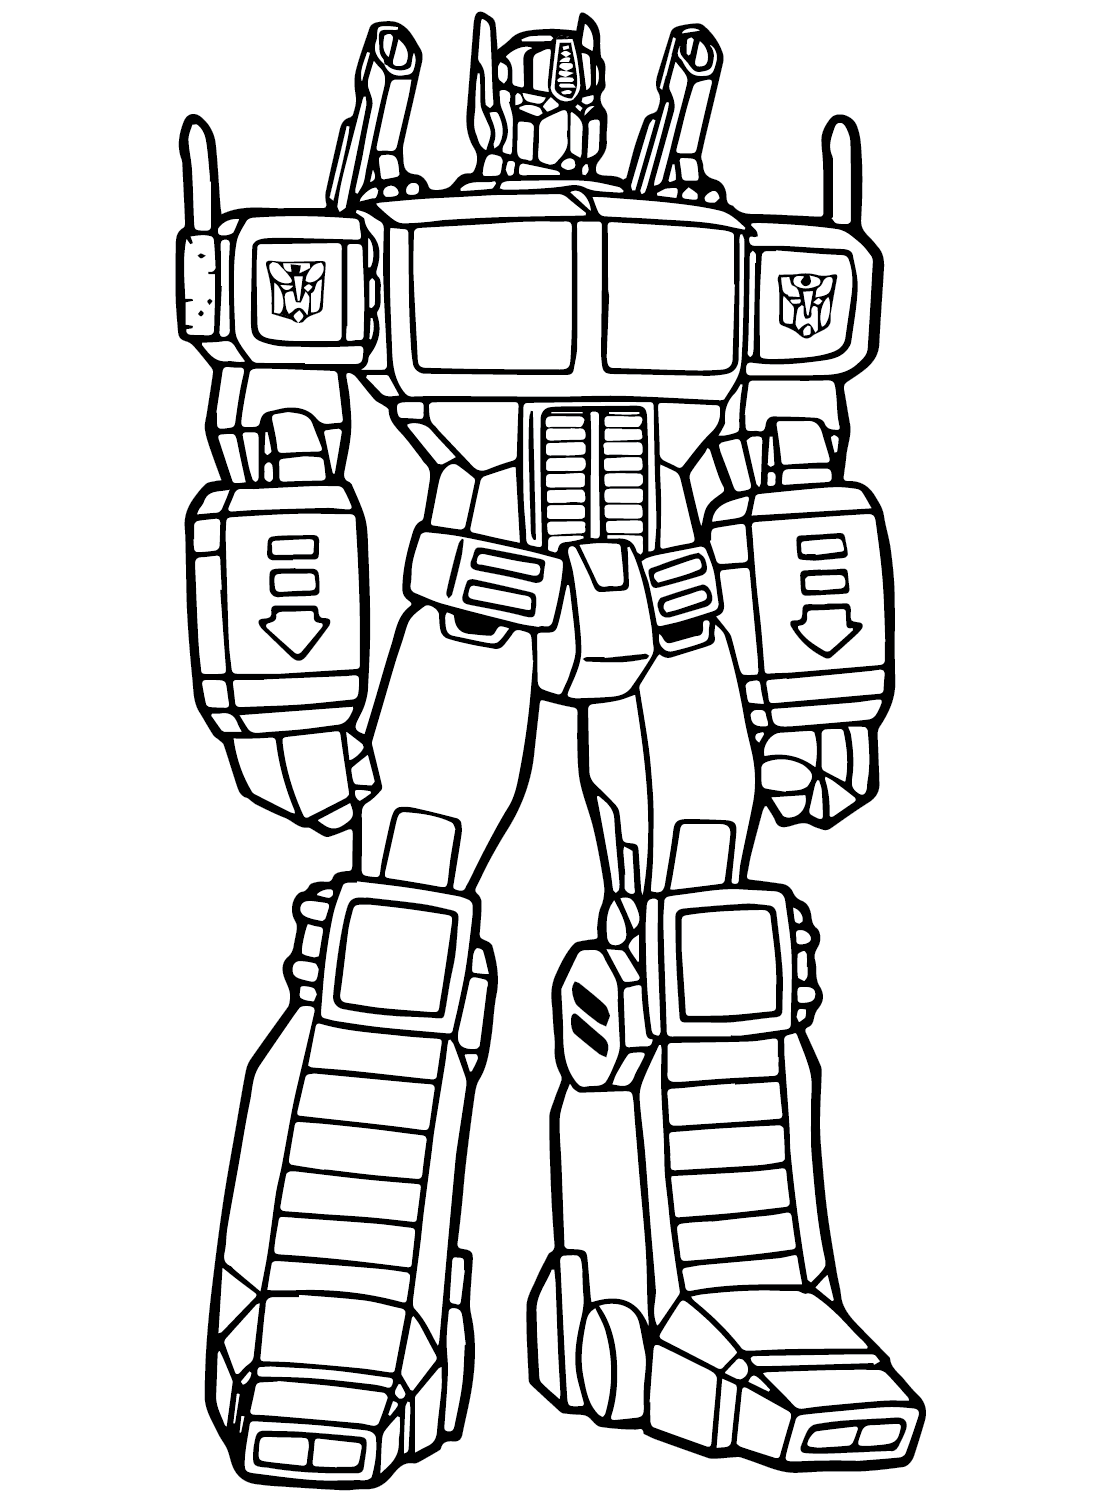 Transformers Coloring Page for Adults